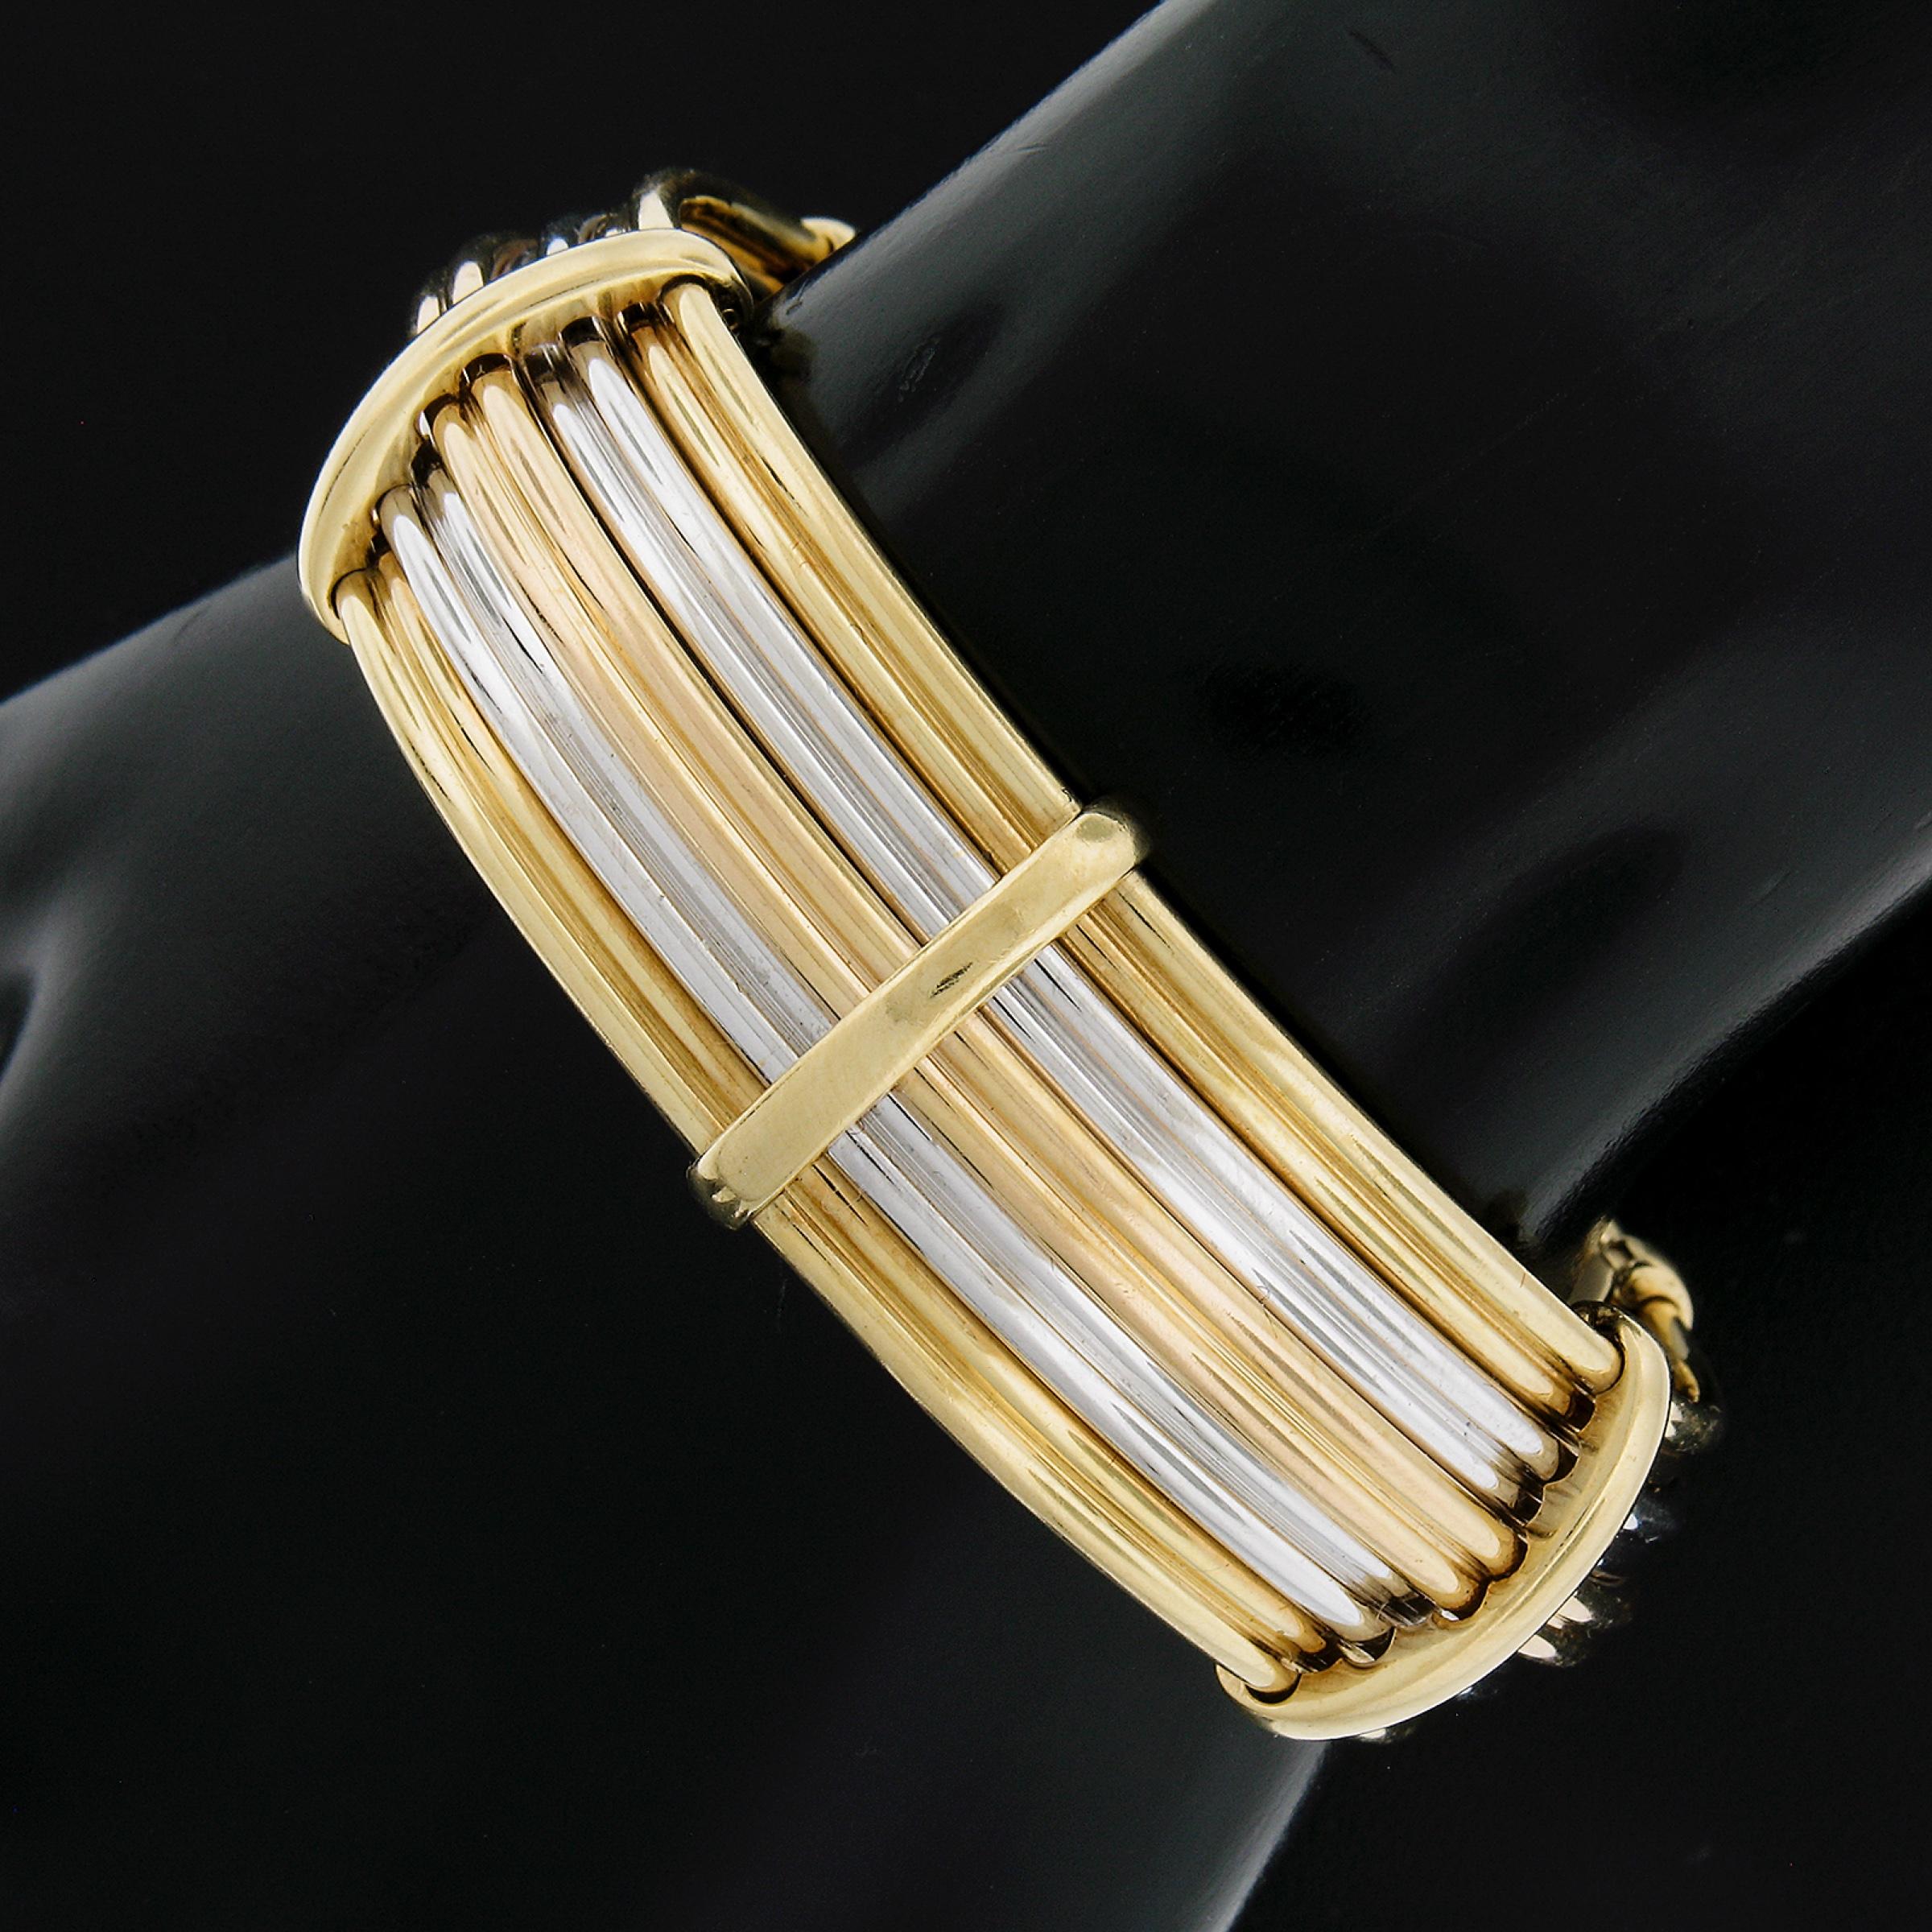 A top notch design with gorgeous thick polished wire. A testament to Italian workmanship and design in gold! Enjoy!

Material: Solid 18k Yellow & White Gold w/ Rose Gold Center
Weight: 49.23 Grams
Type: Wire Open Cuff Bracelet
Length: Will fit up to